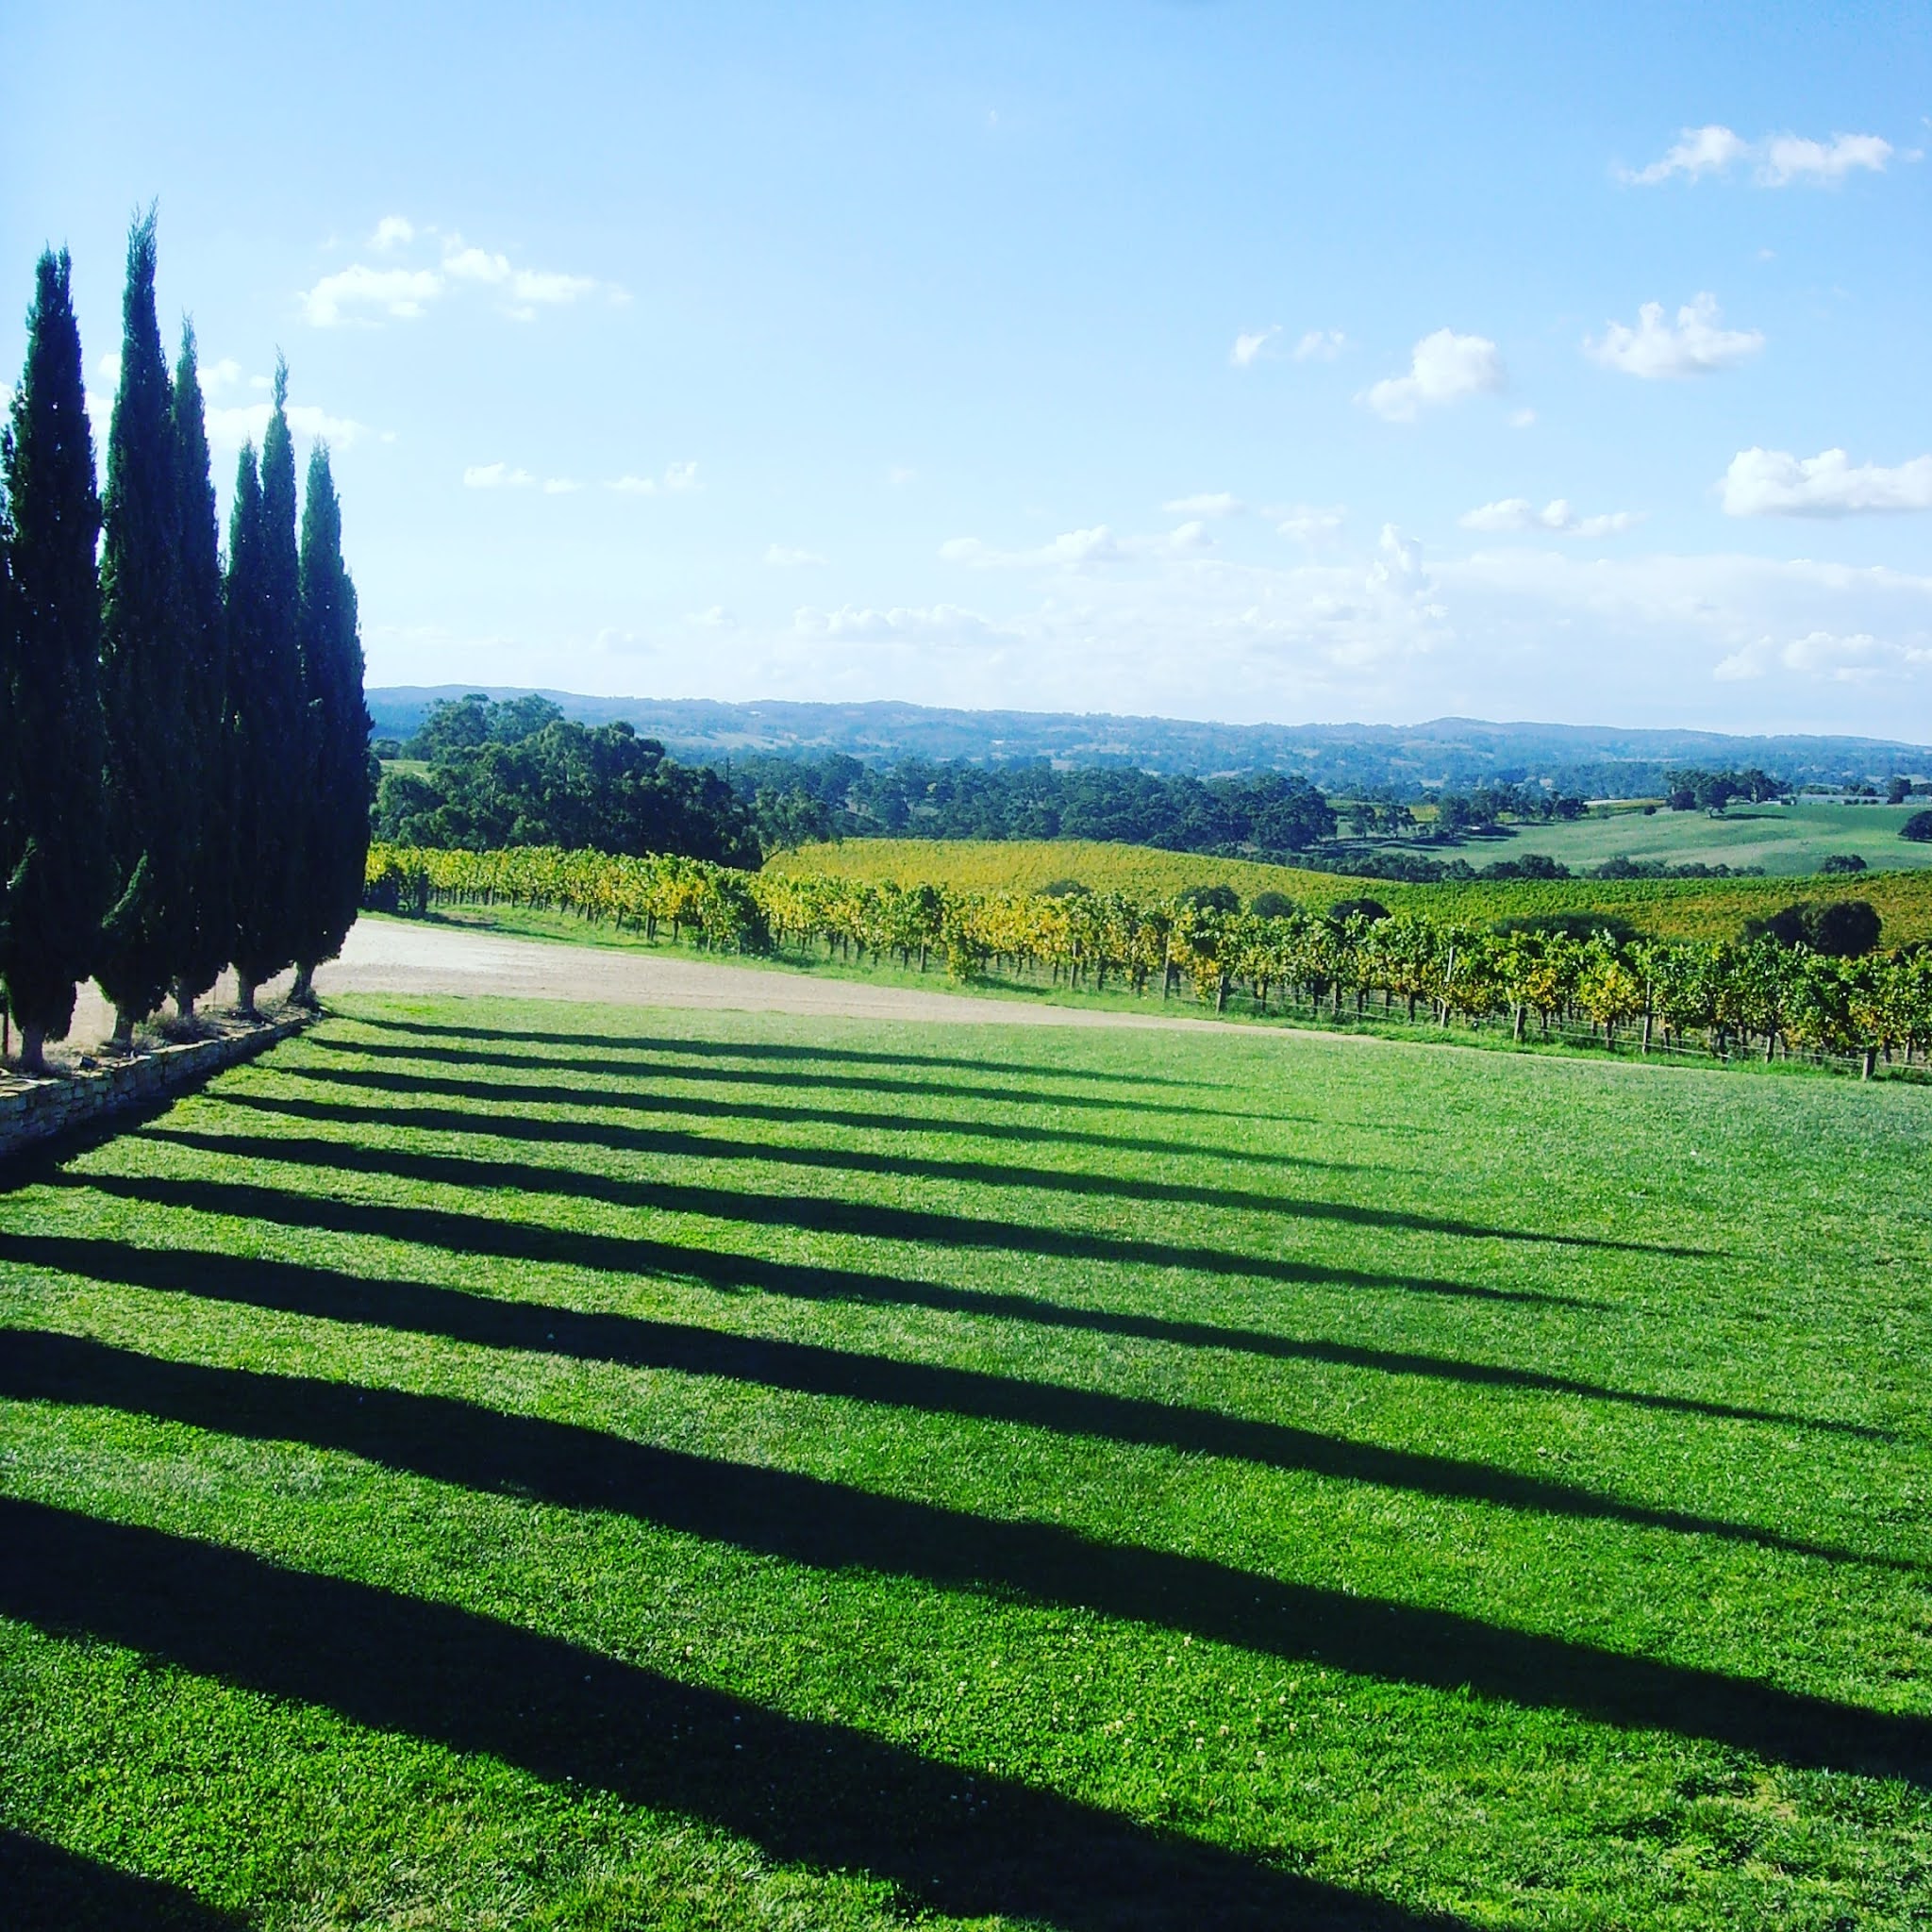 tree shadows across a green lawn at the lane vineyard in adelaide, australia